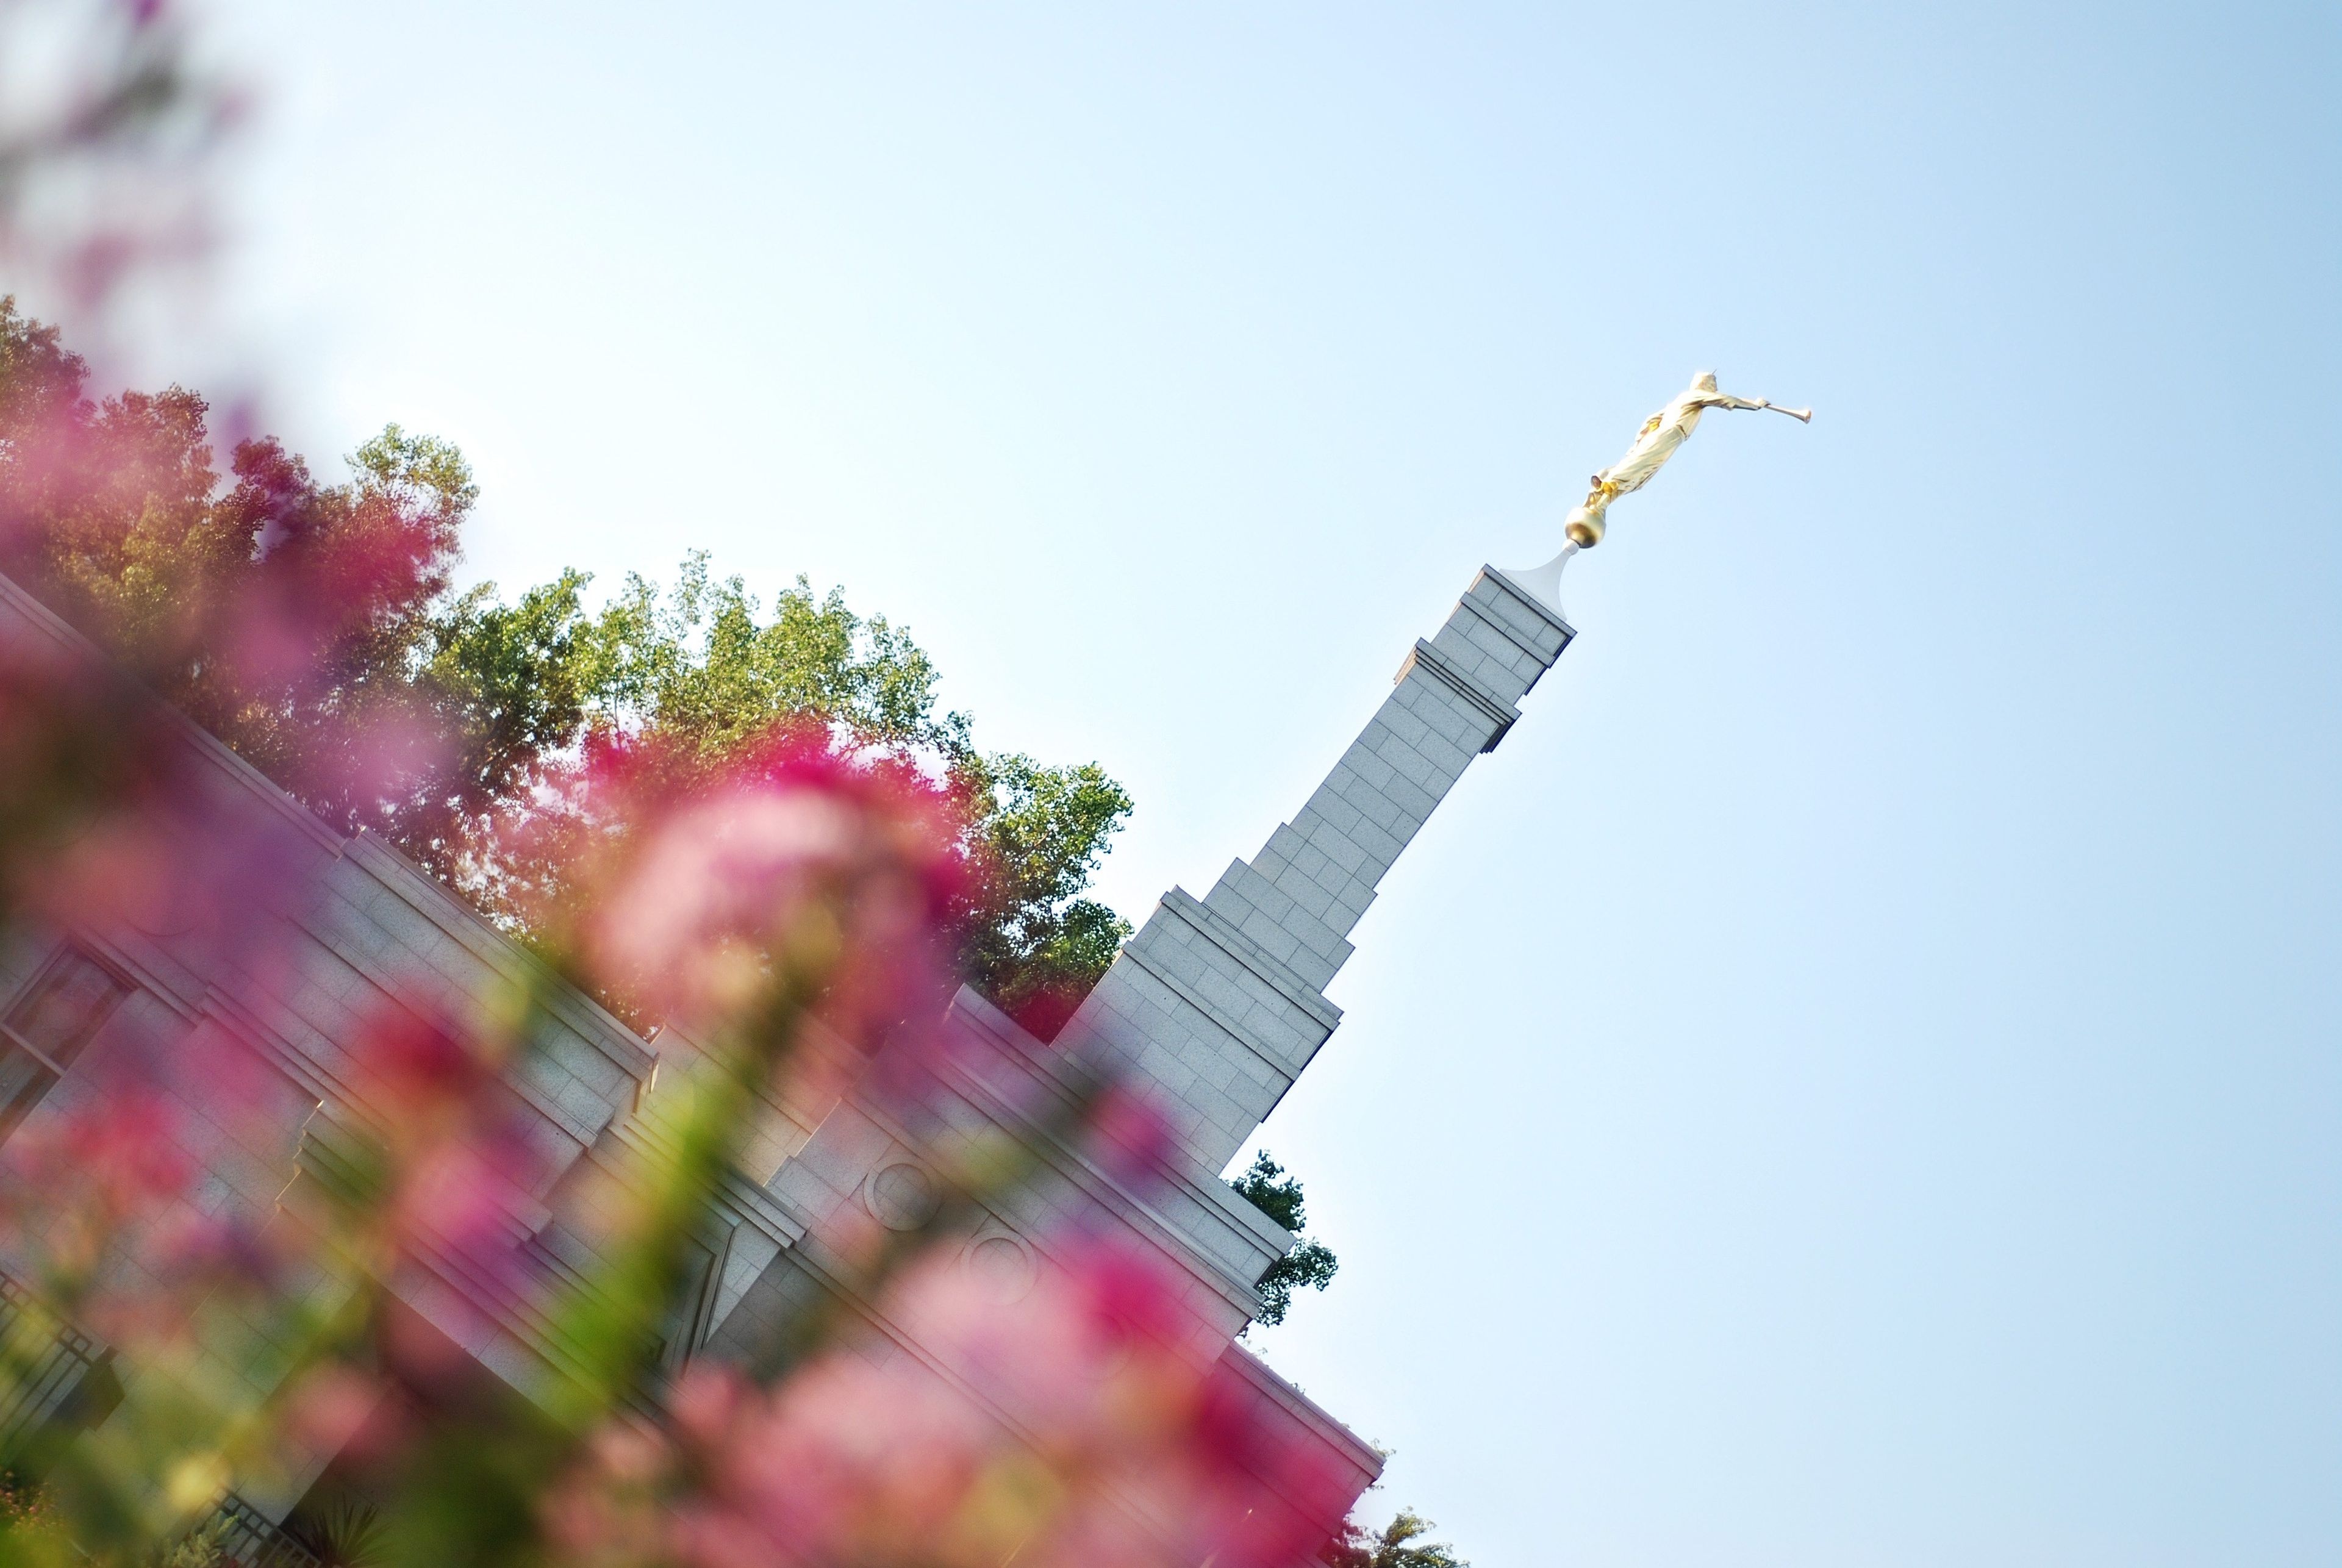 The St. Paul Minnesota Temple spire, including scenery.